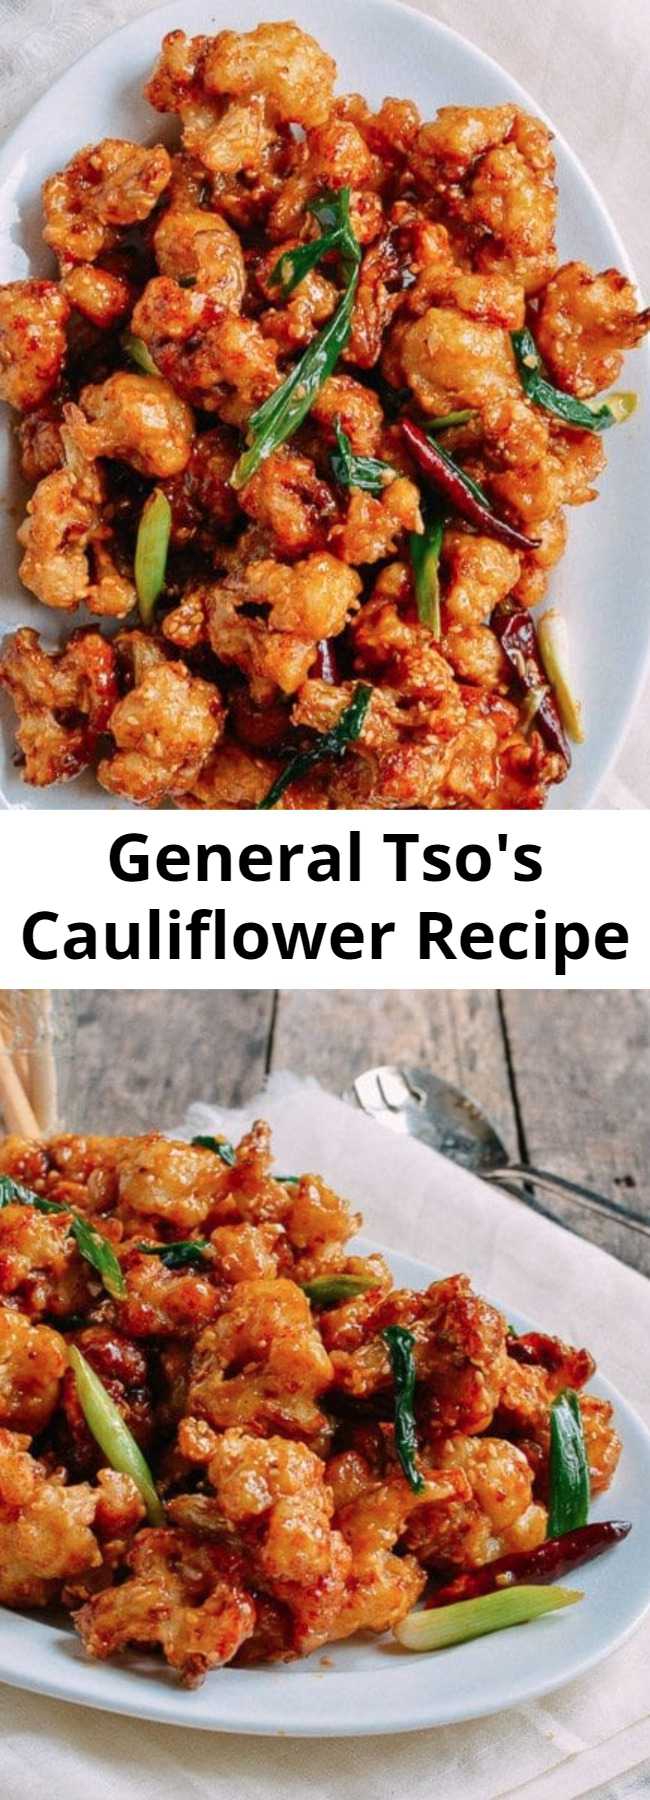 General Tso's Cauliflower Recipe - General Tso's cauliflower is the vegetarian version of the beloved Chinese American dish, General Tso's Chicken. Our General Tso's cauliflower is as good as the original. It’s crispy, super tasty, and might just be better than the chicken version!